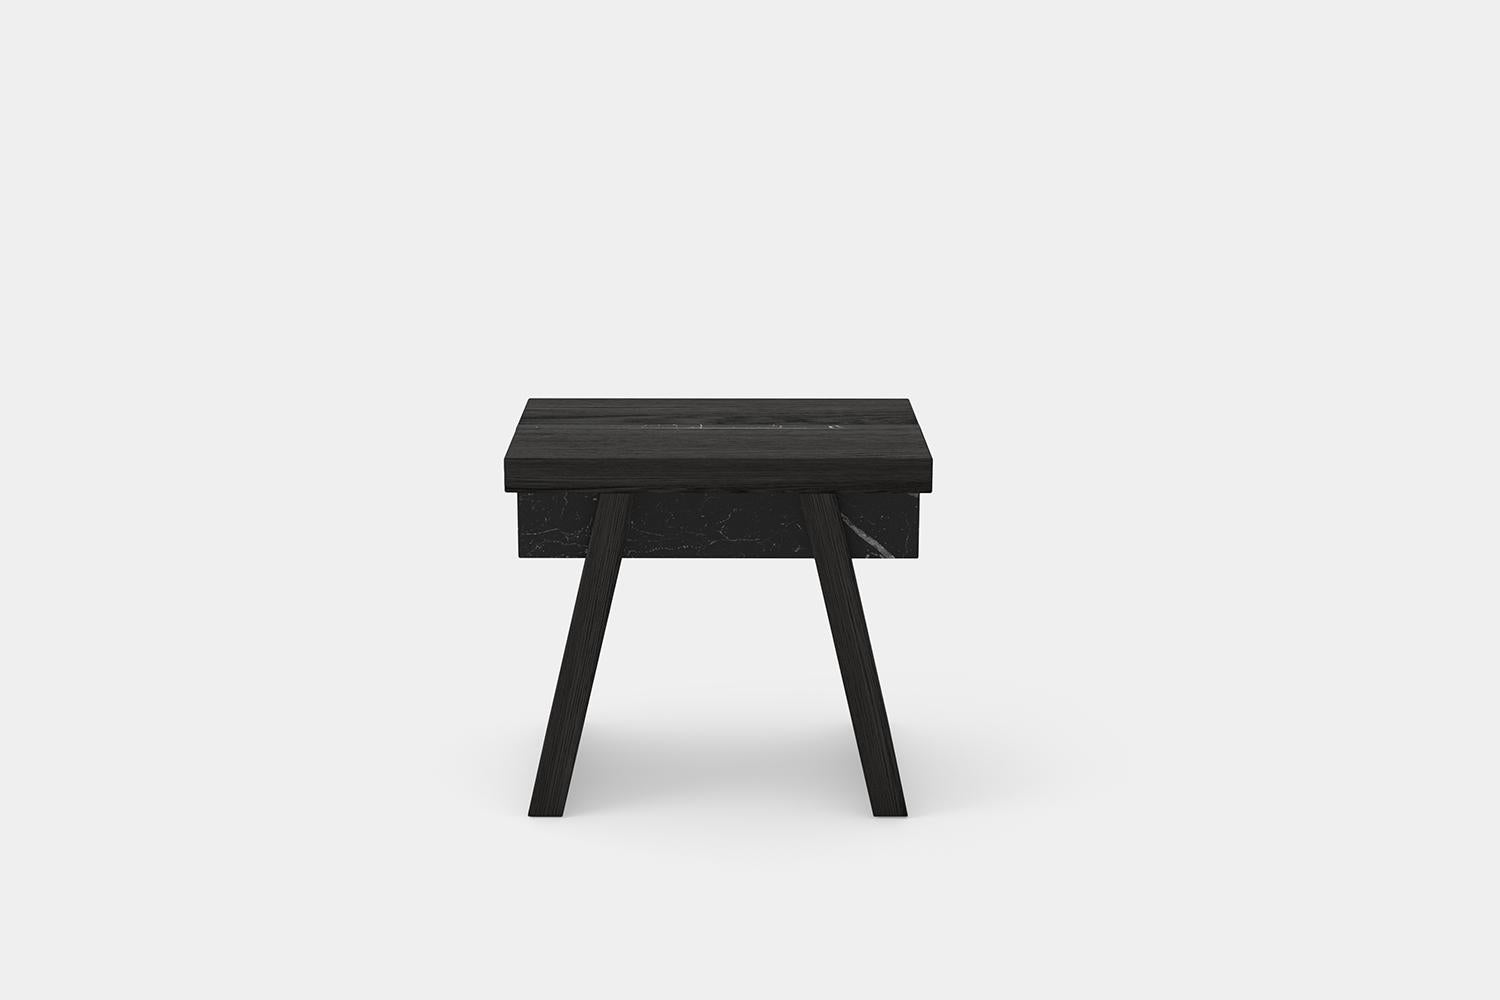 Laws of Motion, Black Solid Wood Side Table, Marble Top Nightstand by Joel Escalona

Laws of Motion is a furniture collection that through a series of different typologies explores concepts like force, gravity and movement. Each of these functional